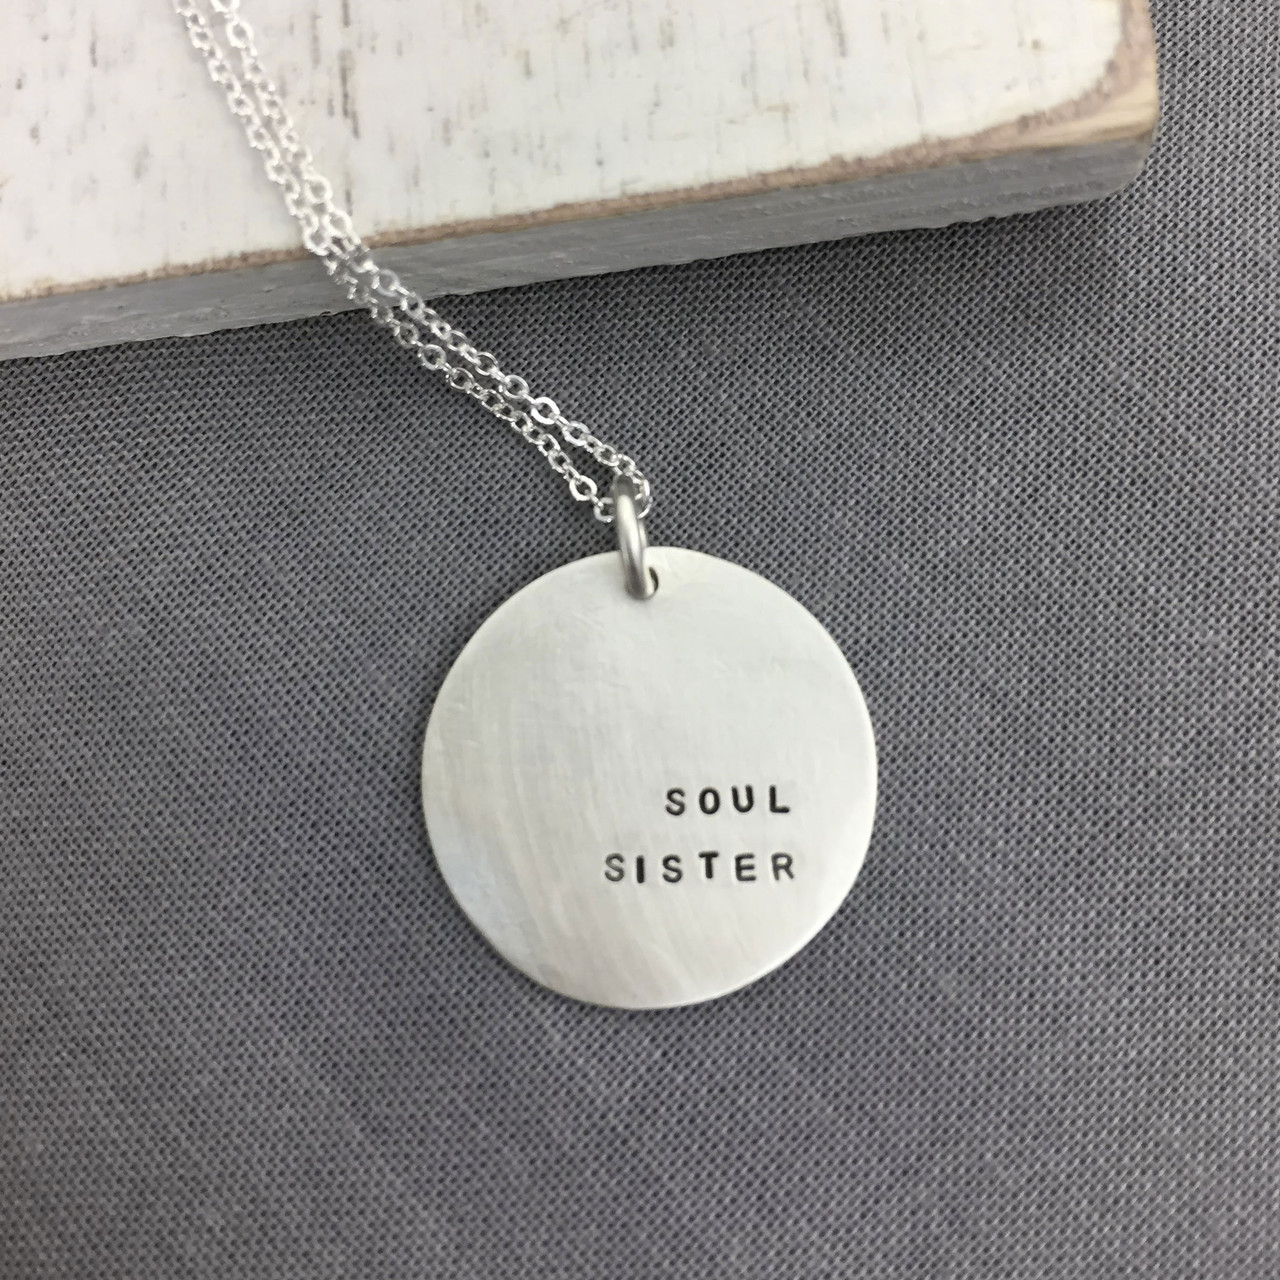 Soul Sister Hand Stamped Silver Necklace